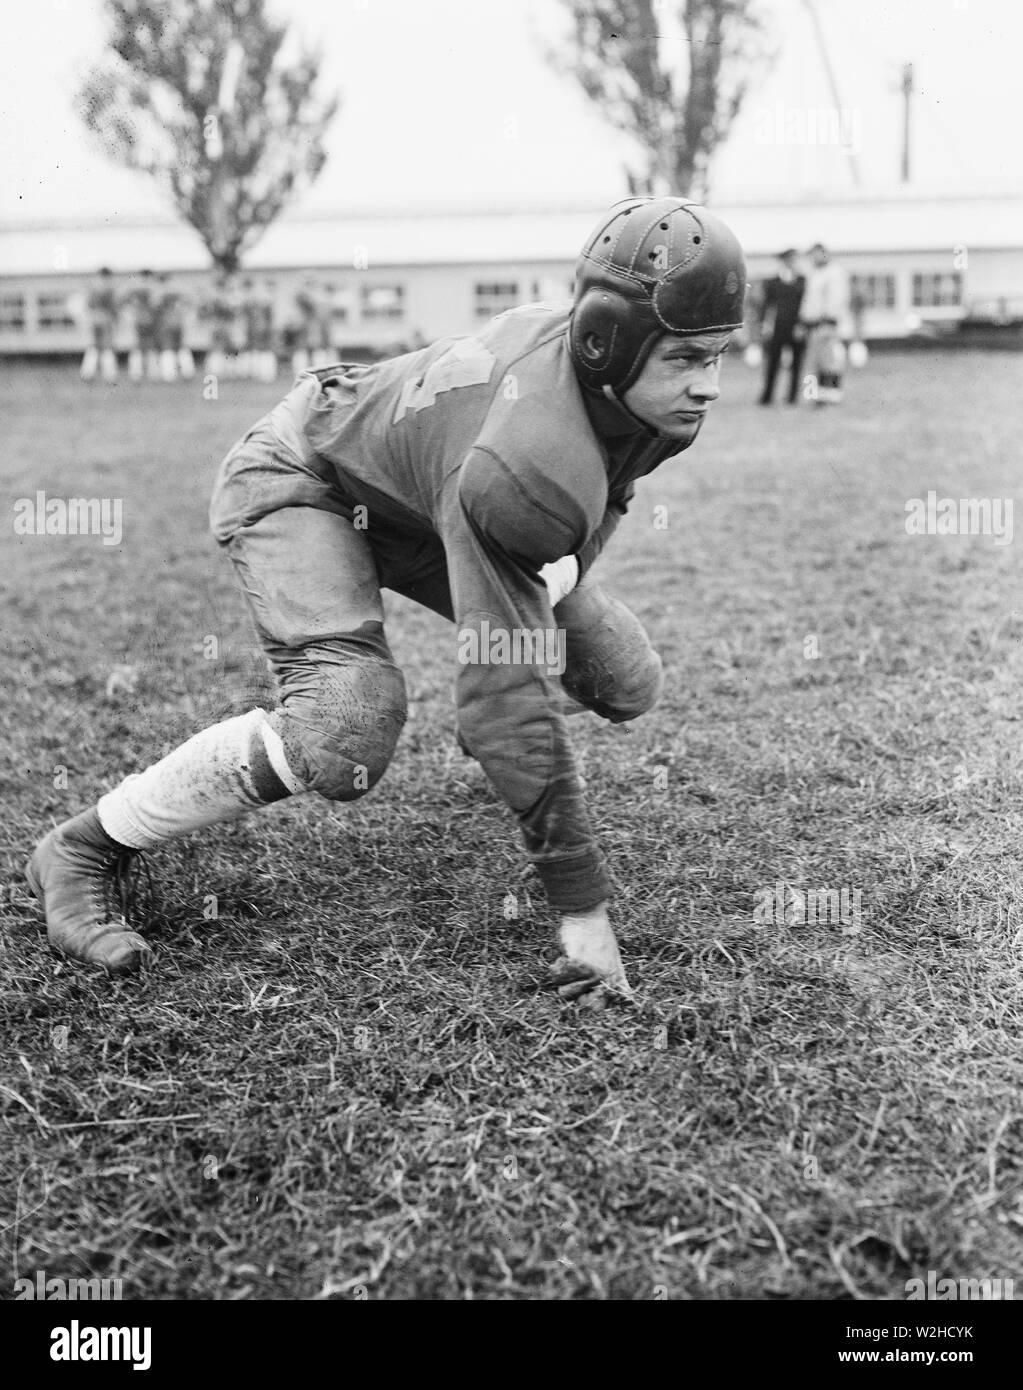 Look out! Notre Dame. Otis Cole, one of the Navy players on whose endurance, ability and general good playing the midshipmen of Annapolis are placing their hopes to beat Notre Dame this coming Saturday. Cole plays guard on the Navy team. 10/24/35 Stock Photo